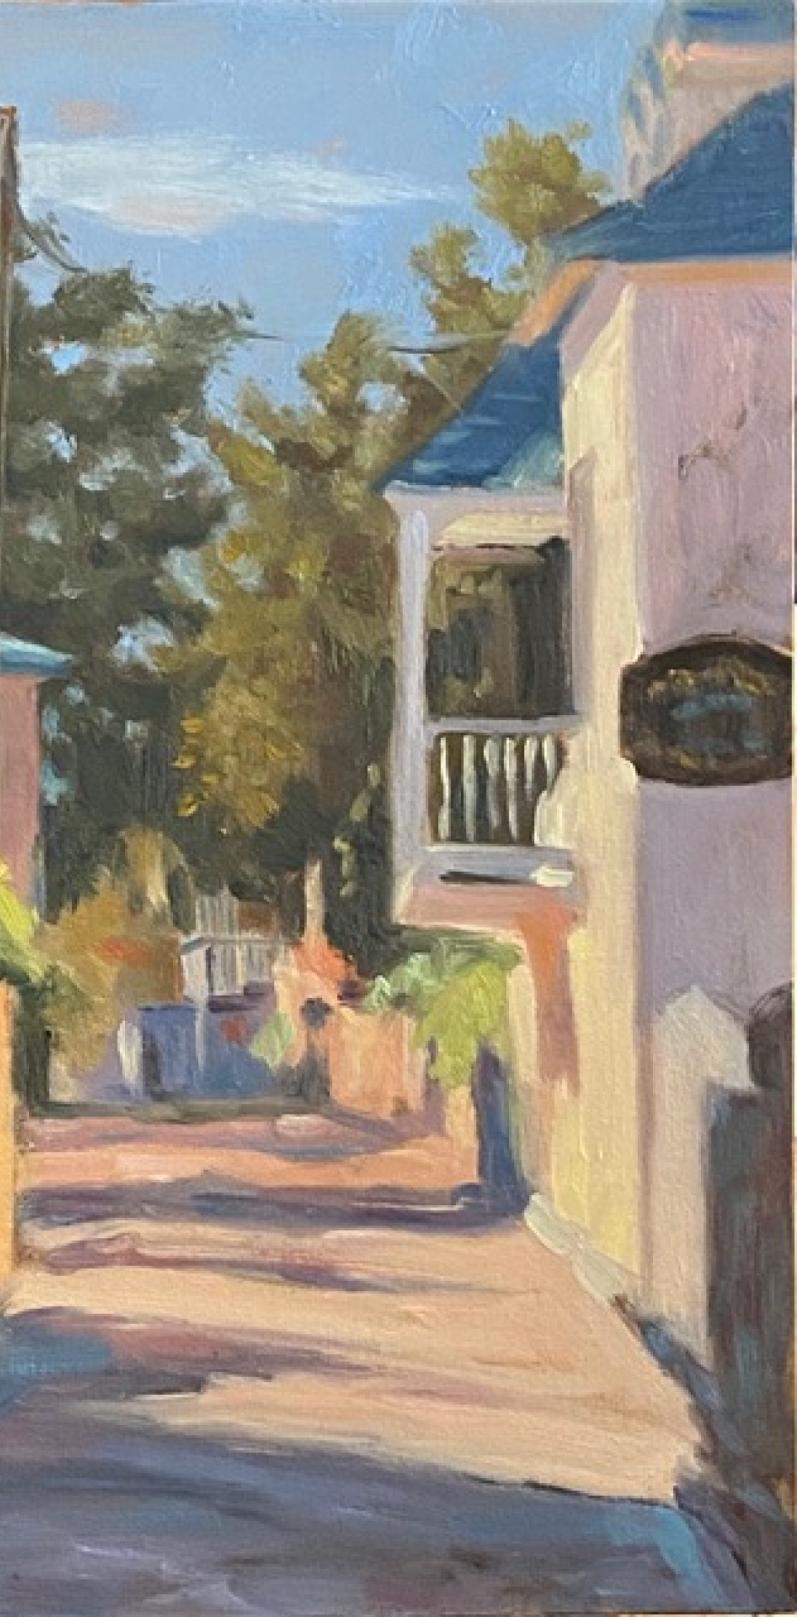 Country Lane in France  is a plein aire painting done on a recent trip buy artist Judy Elias to rural France. This oil painting  is what Judy Judy Elias  sees in everyday life as paintings - the colors in the shadows, the light coming through the